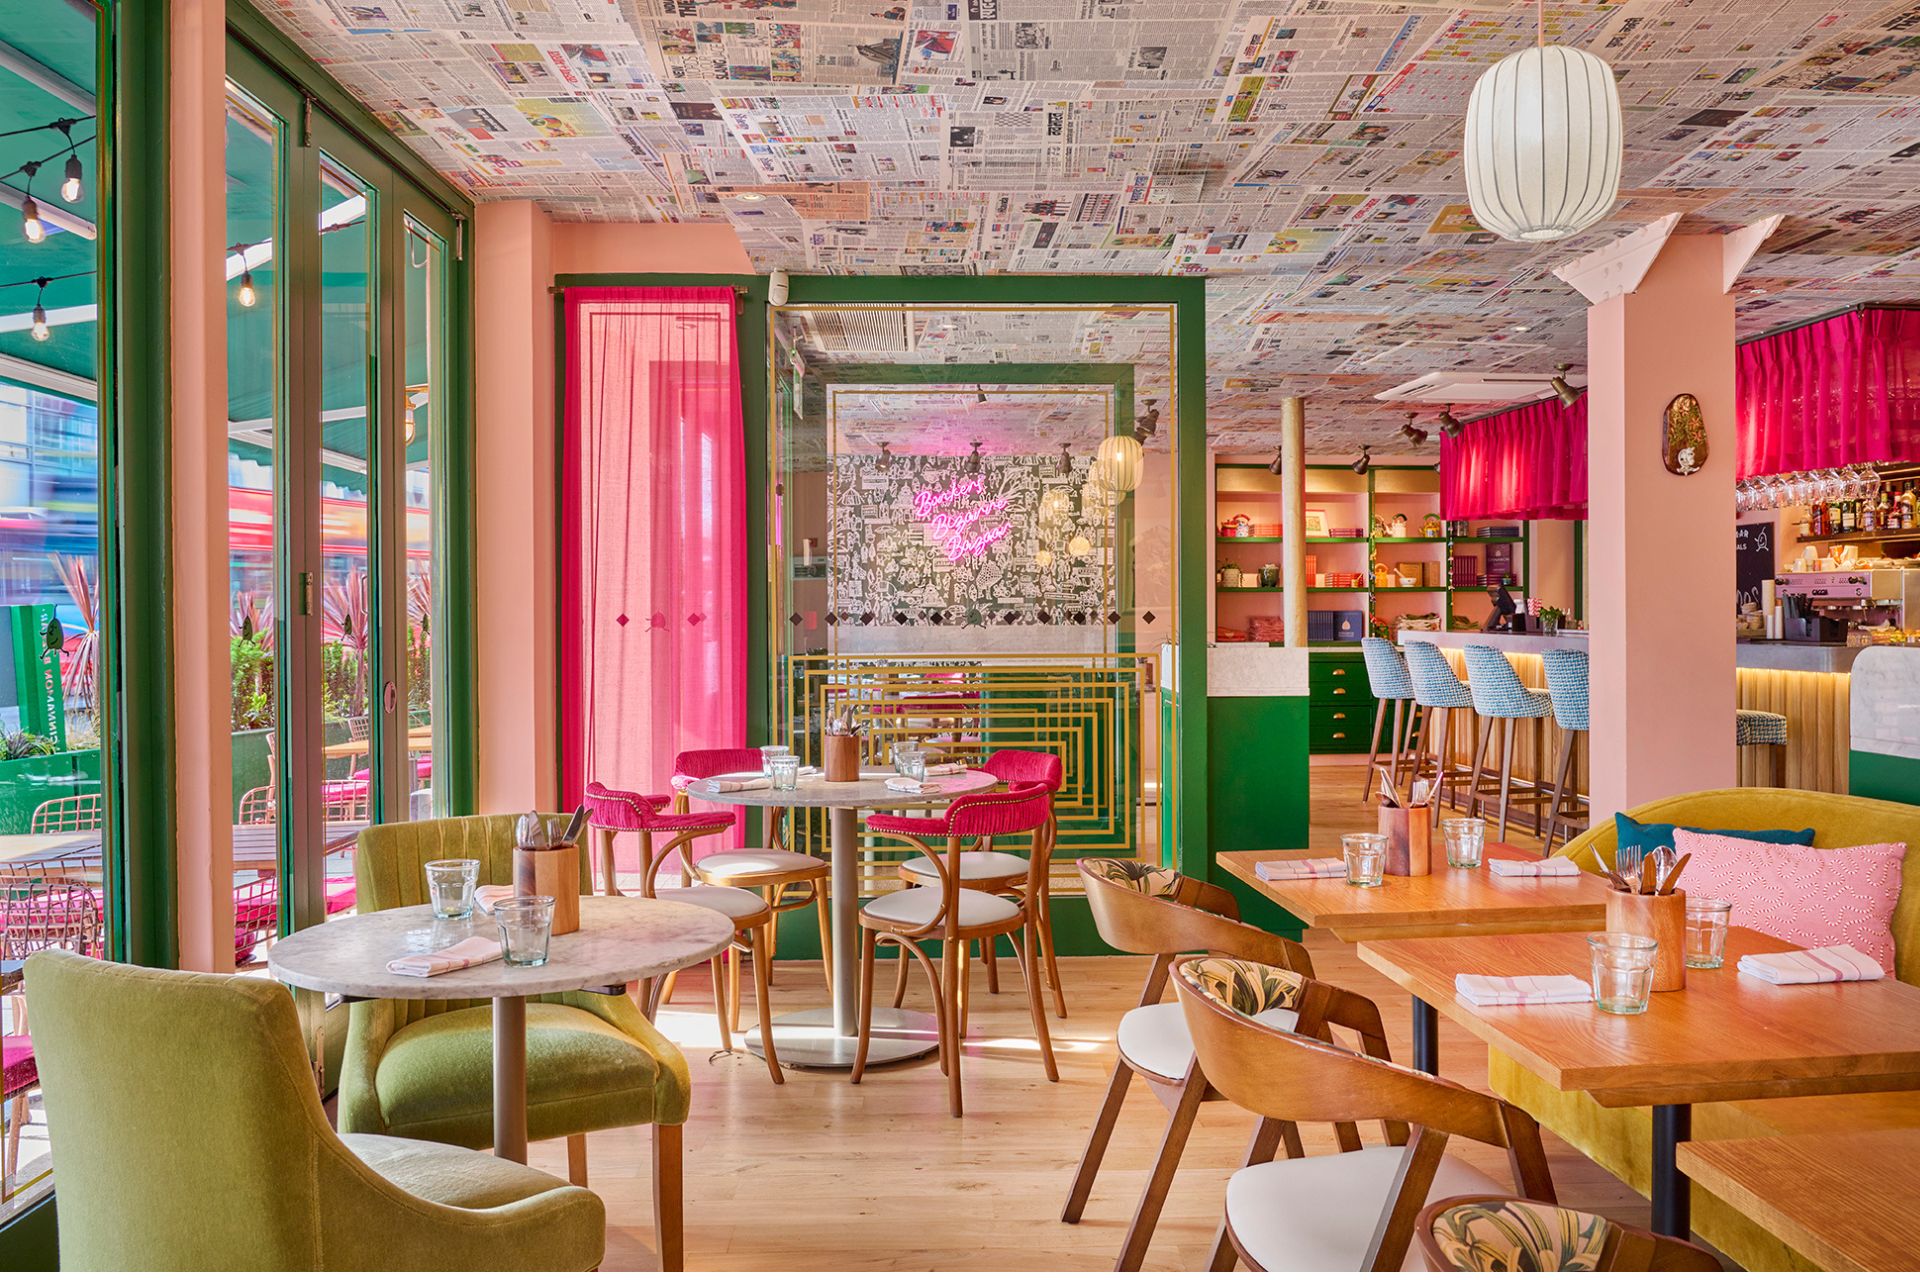 Interiors of Cinnamon Bazaar Richmond, with green velvet dining chairs and pink accents.